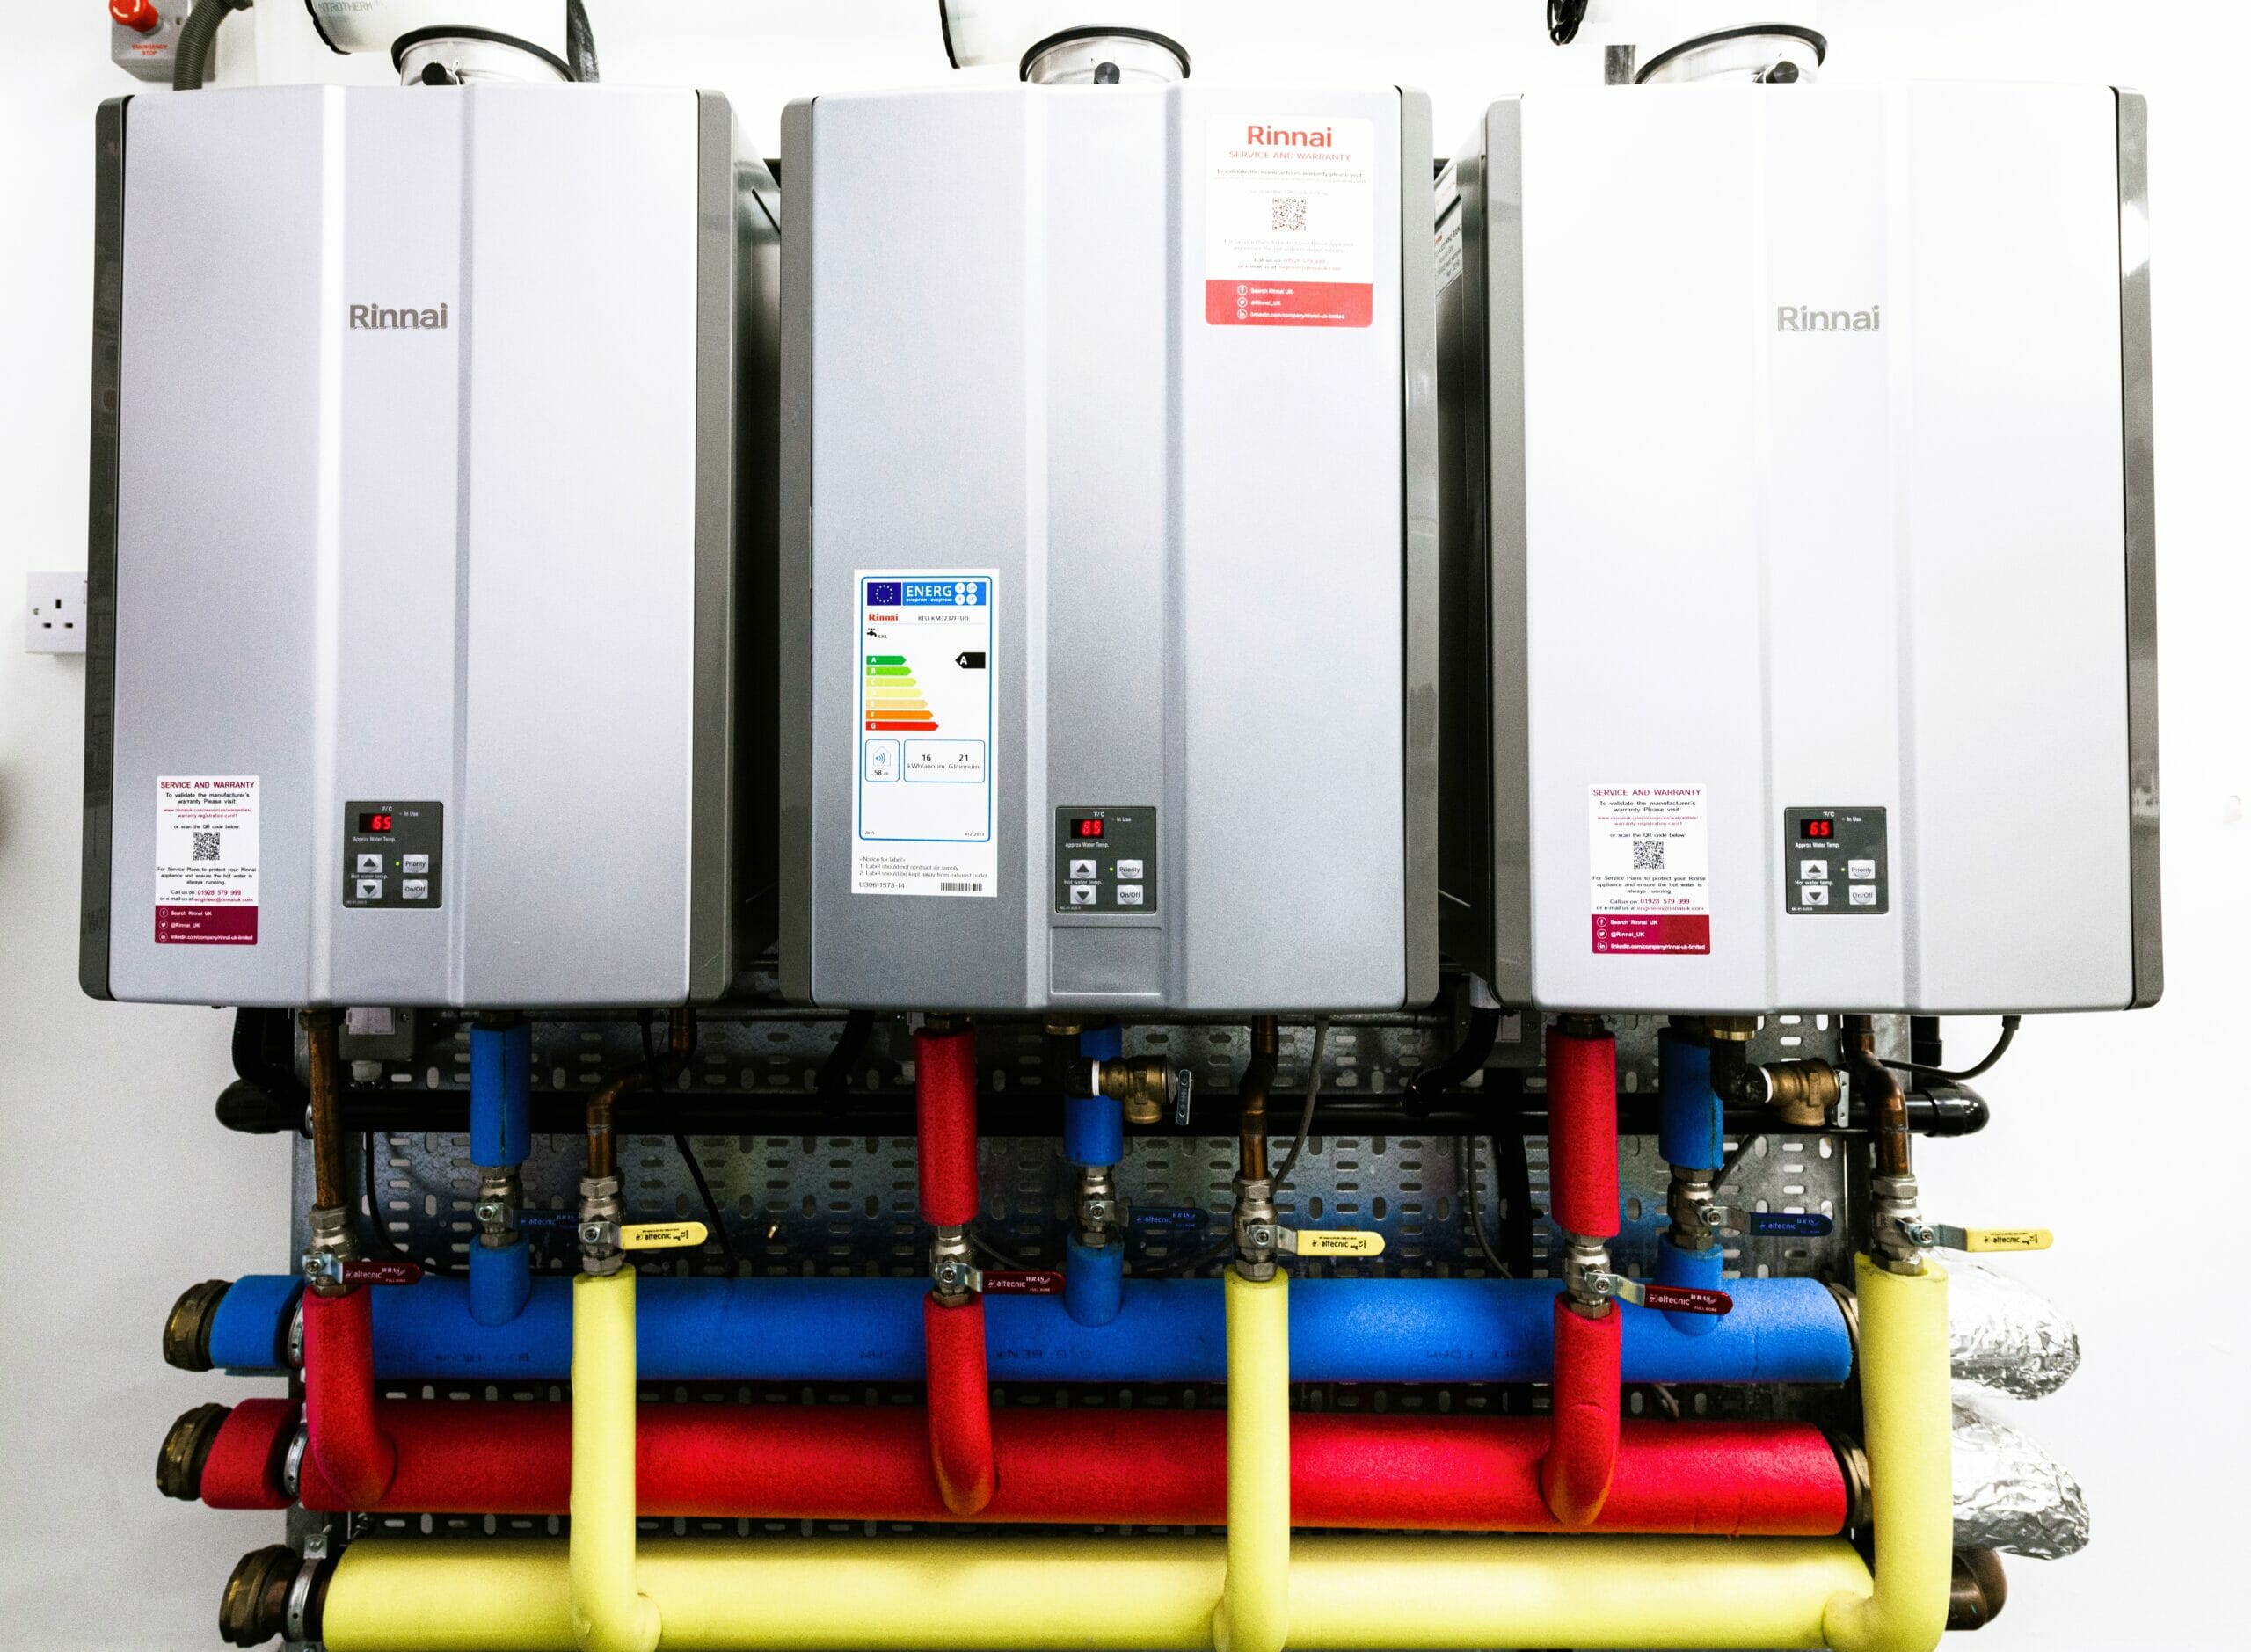 RINNAI’S NEW CARBON COST COMPARISON AID – ONLINE AND ON DEMAND